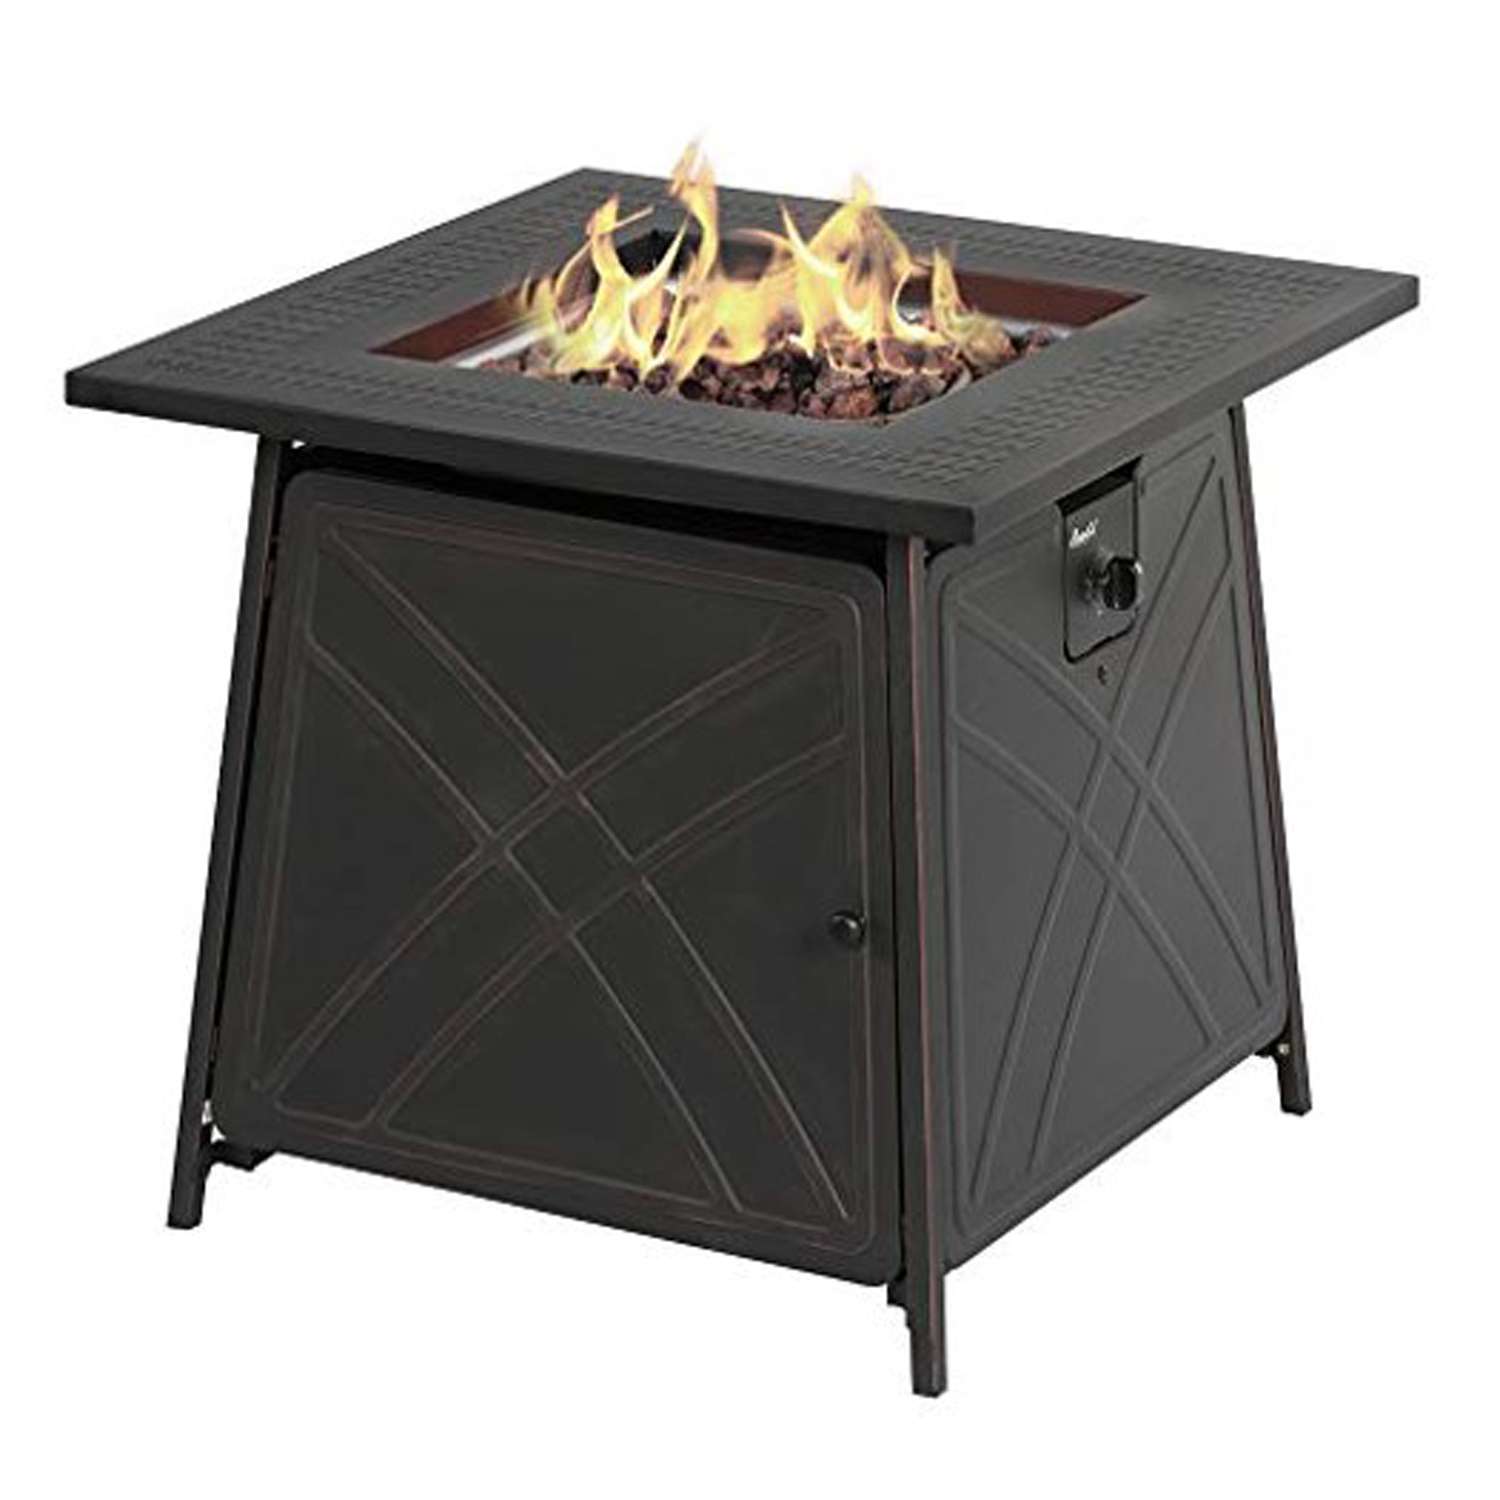 Living Accents Square Propane Fire Pit 25 5 In H X 28 In W X 28 In D Steel Ace Hardware